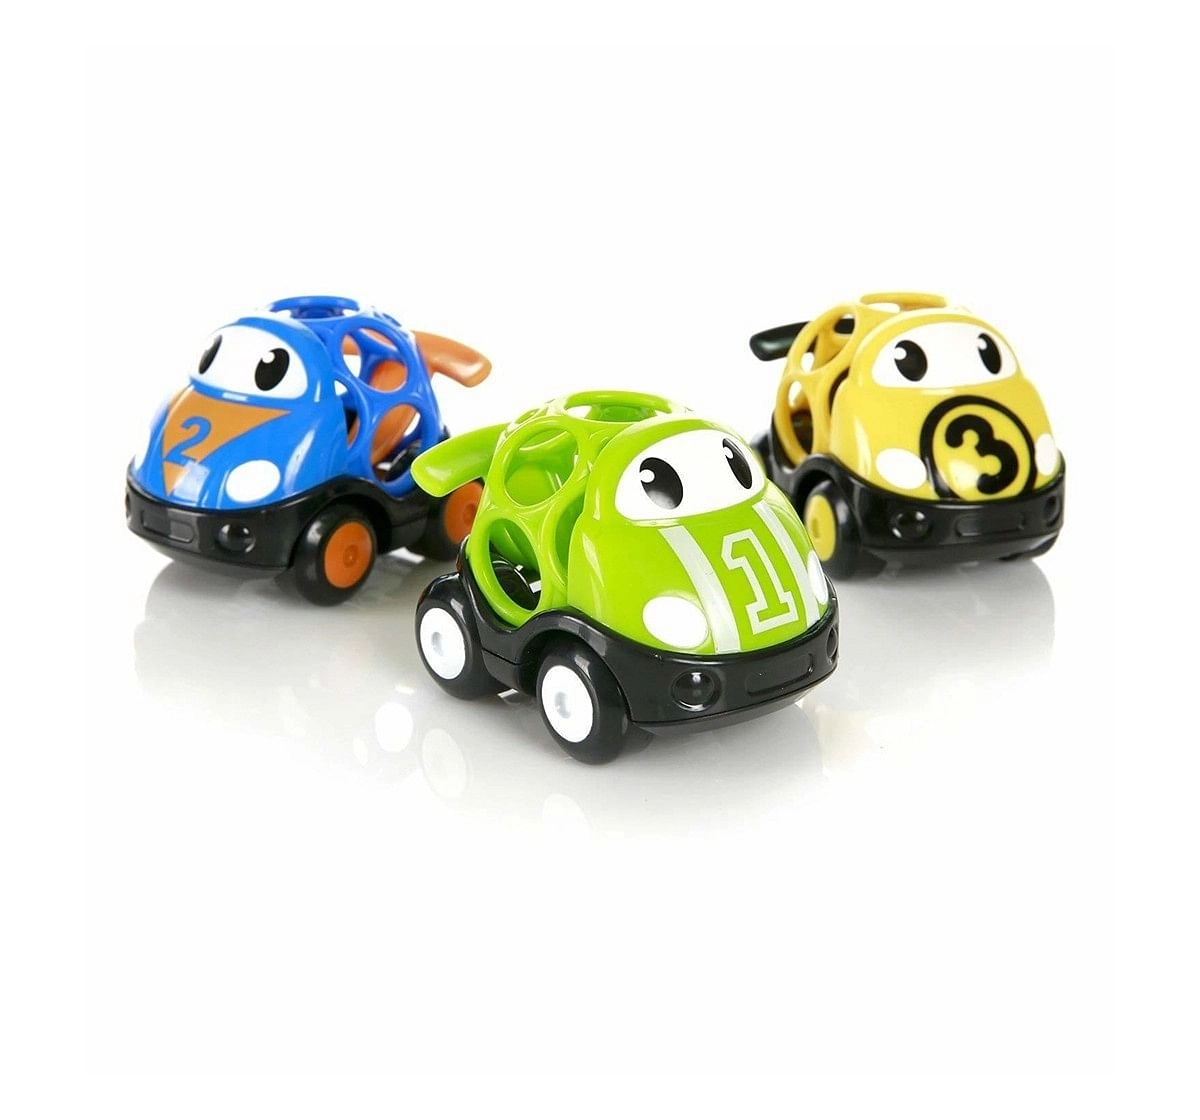 Kids Ii Ob go Grippers Race Car Set Early Learner Toys for Kids age 3Y+ 